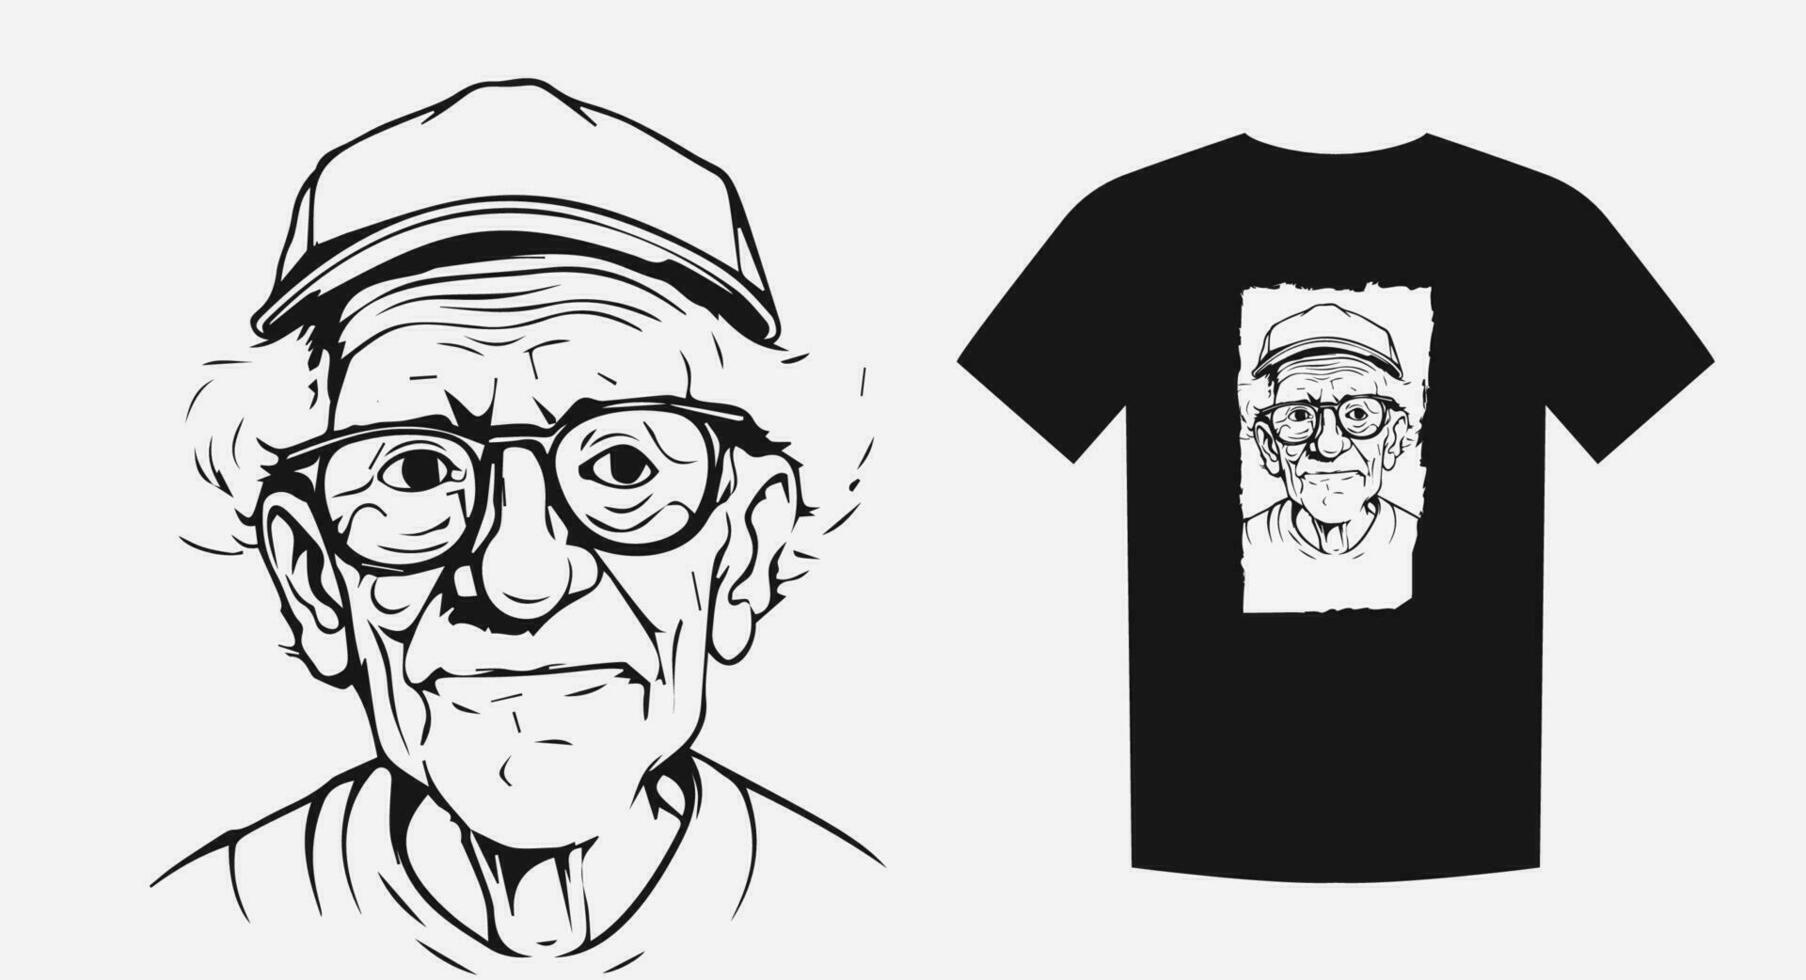 Vintage vector portrait of an elderly man in a retro contour style. Perfect for shirts, logos, and tattoos. Timeless and captivating. Vector illustration.